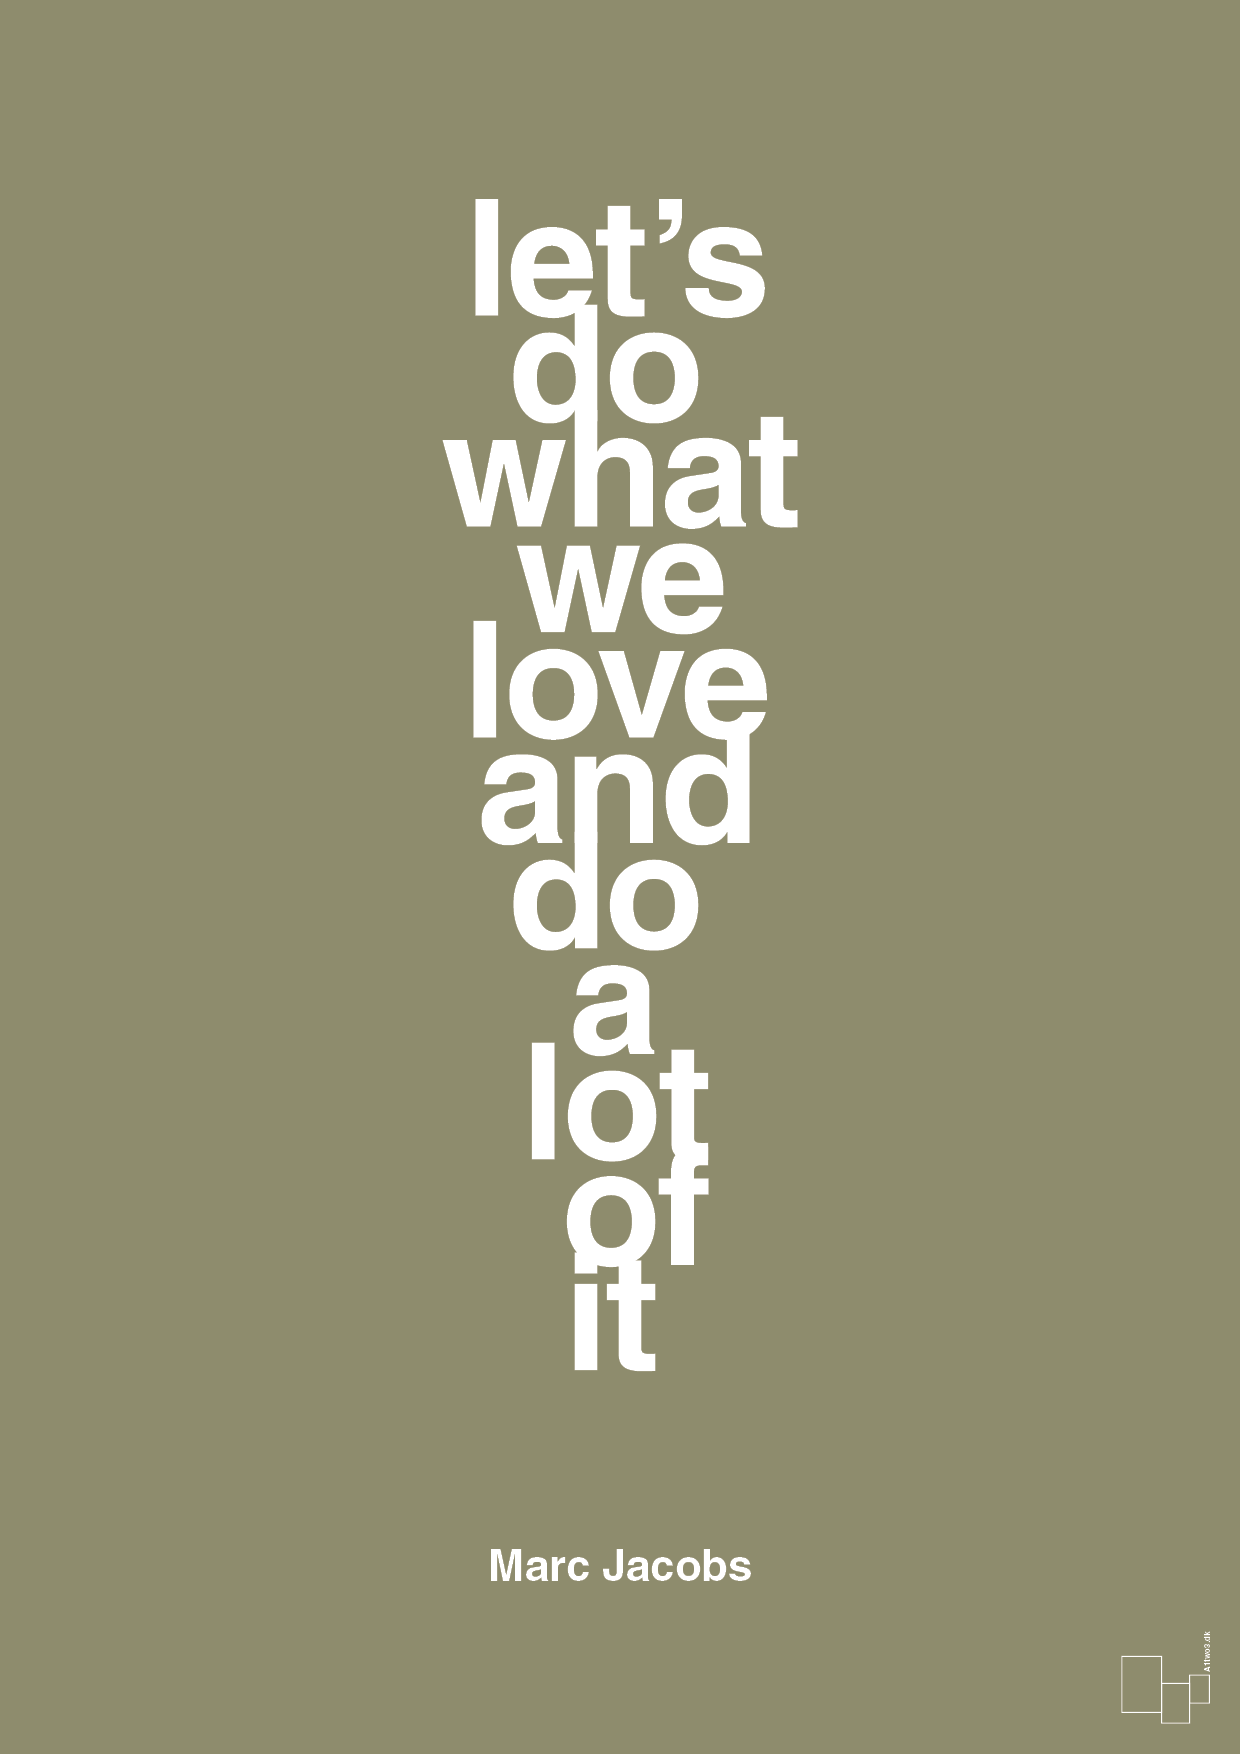 lets do what we love and do a lot of it - Plakat med Citater i Misty Forrest